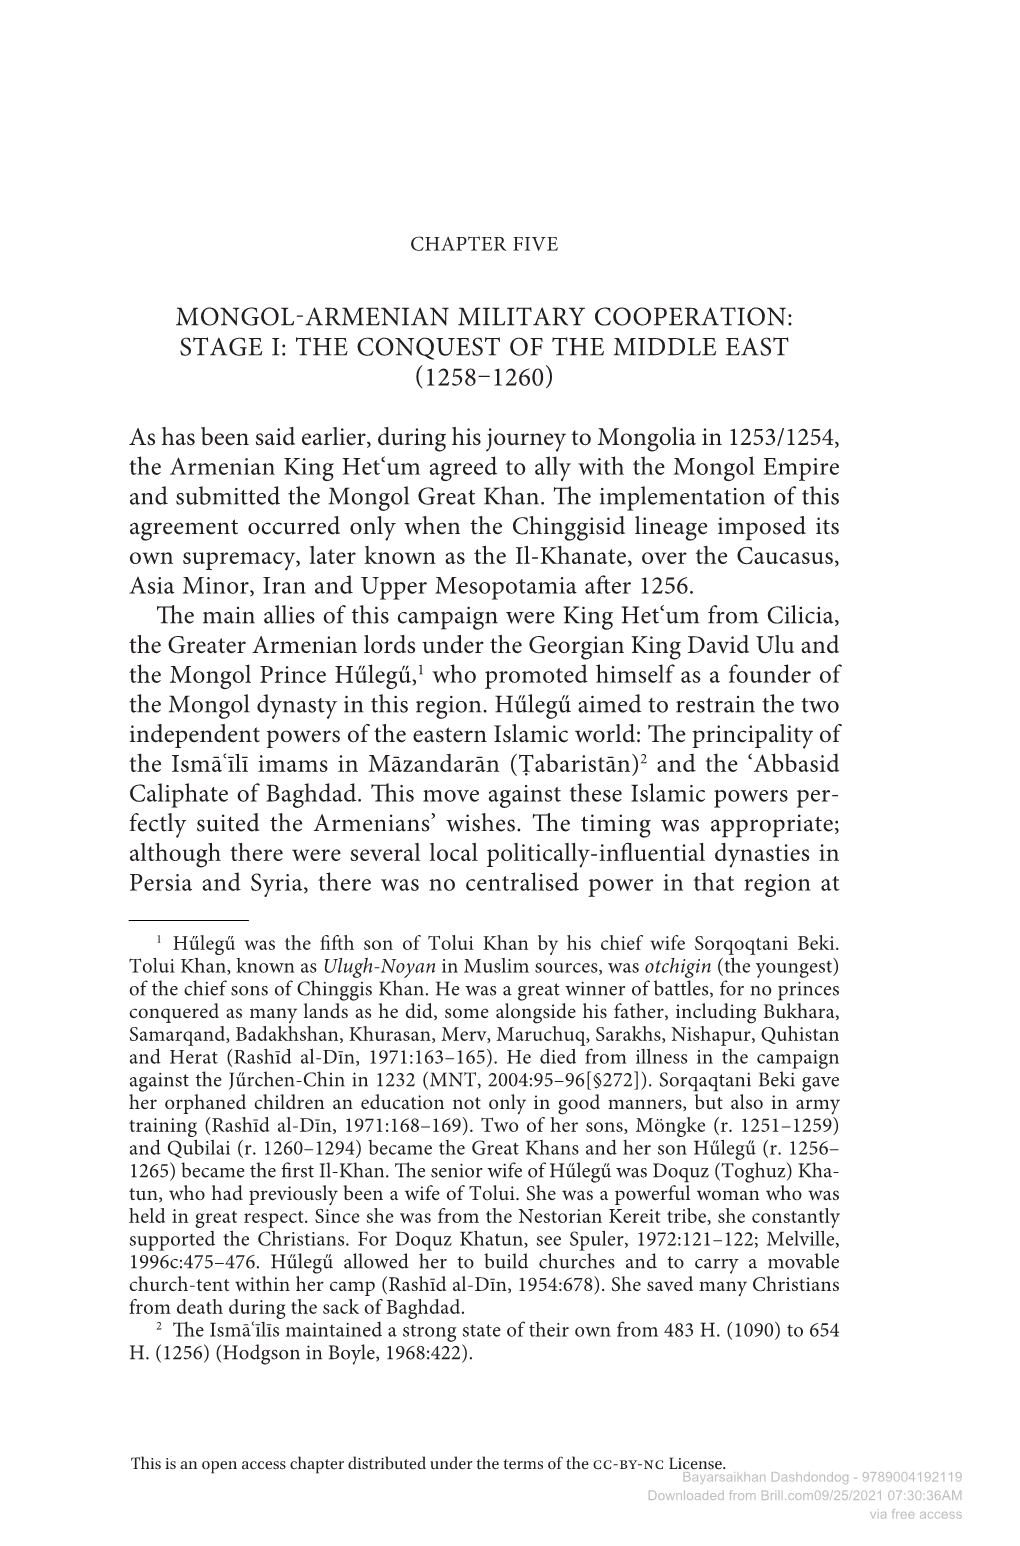 Mongol Armenian Military Cooperation: Stage I